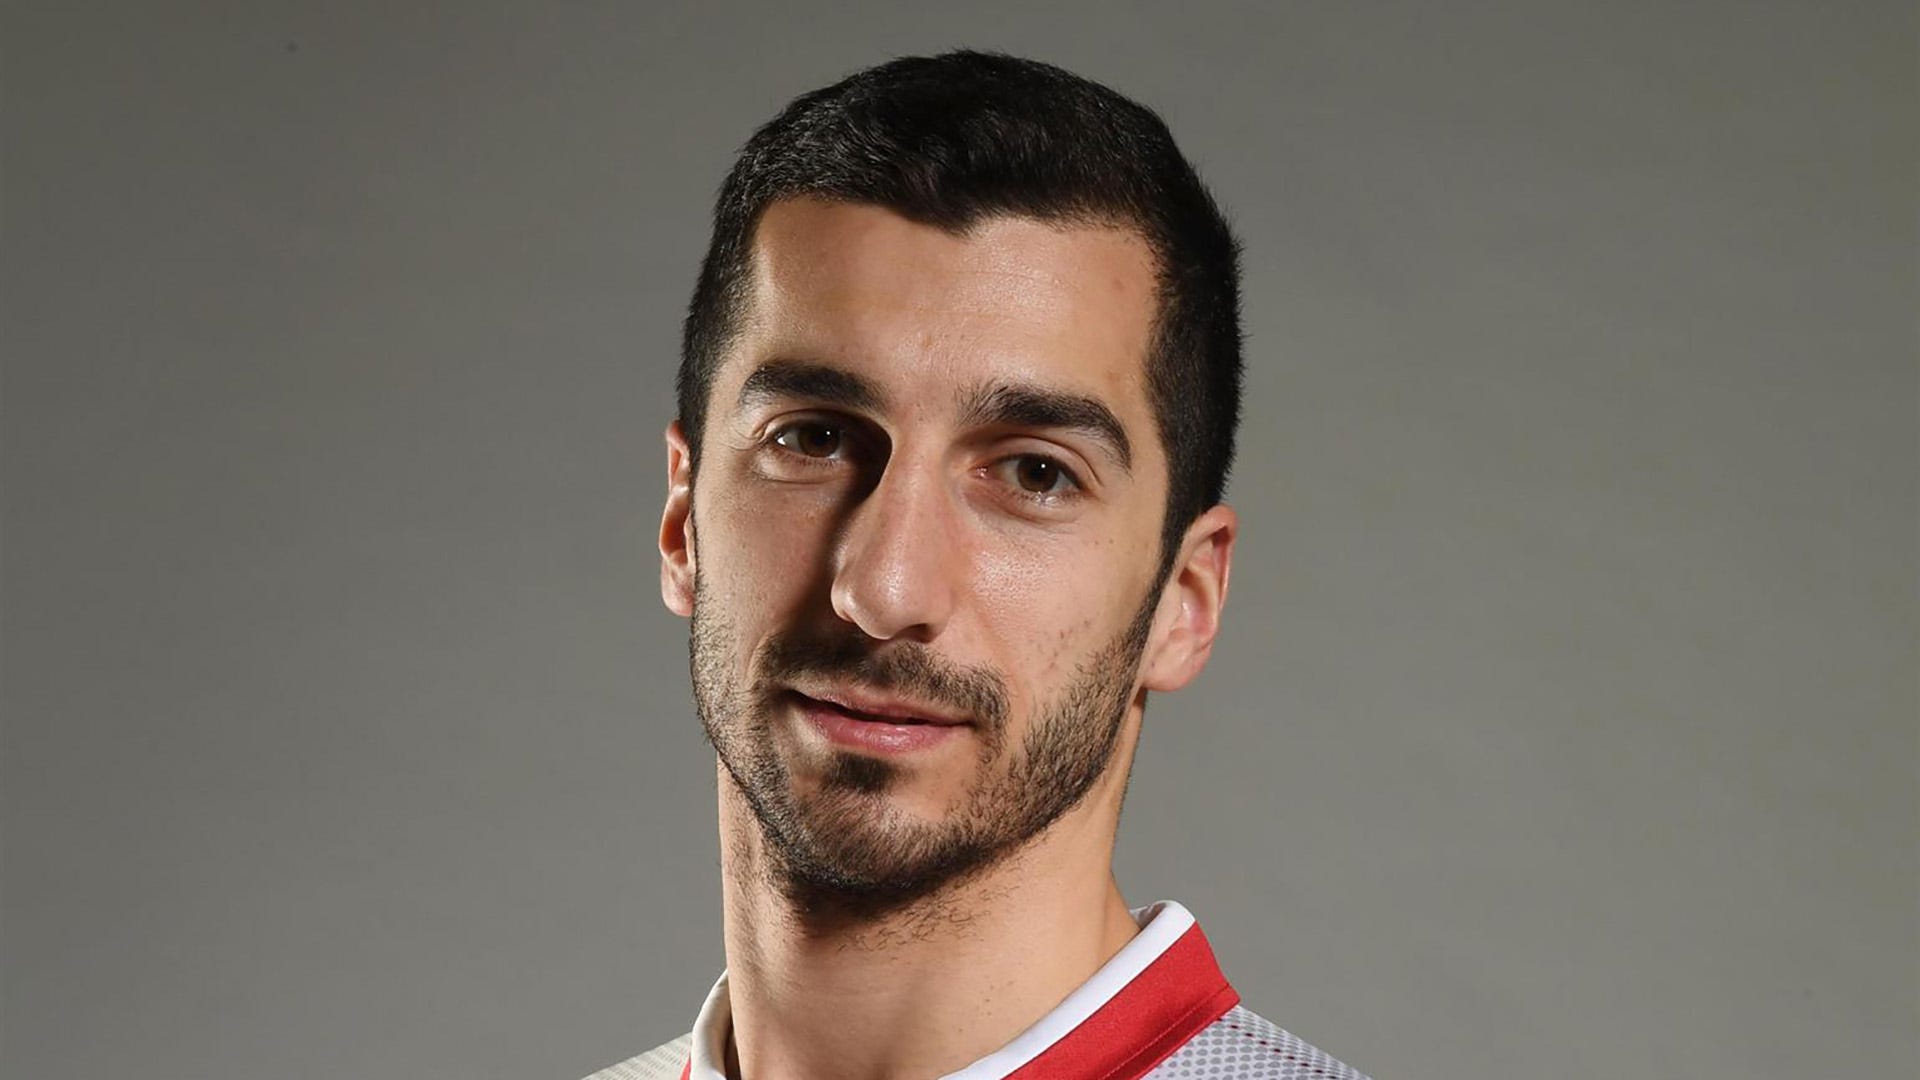 Mkhitaryan reveals why he wasn't happy at Arsenal - Daily Post Nigeria